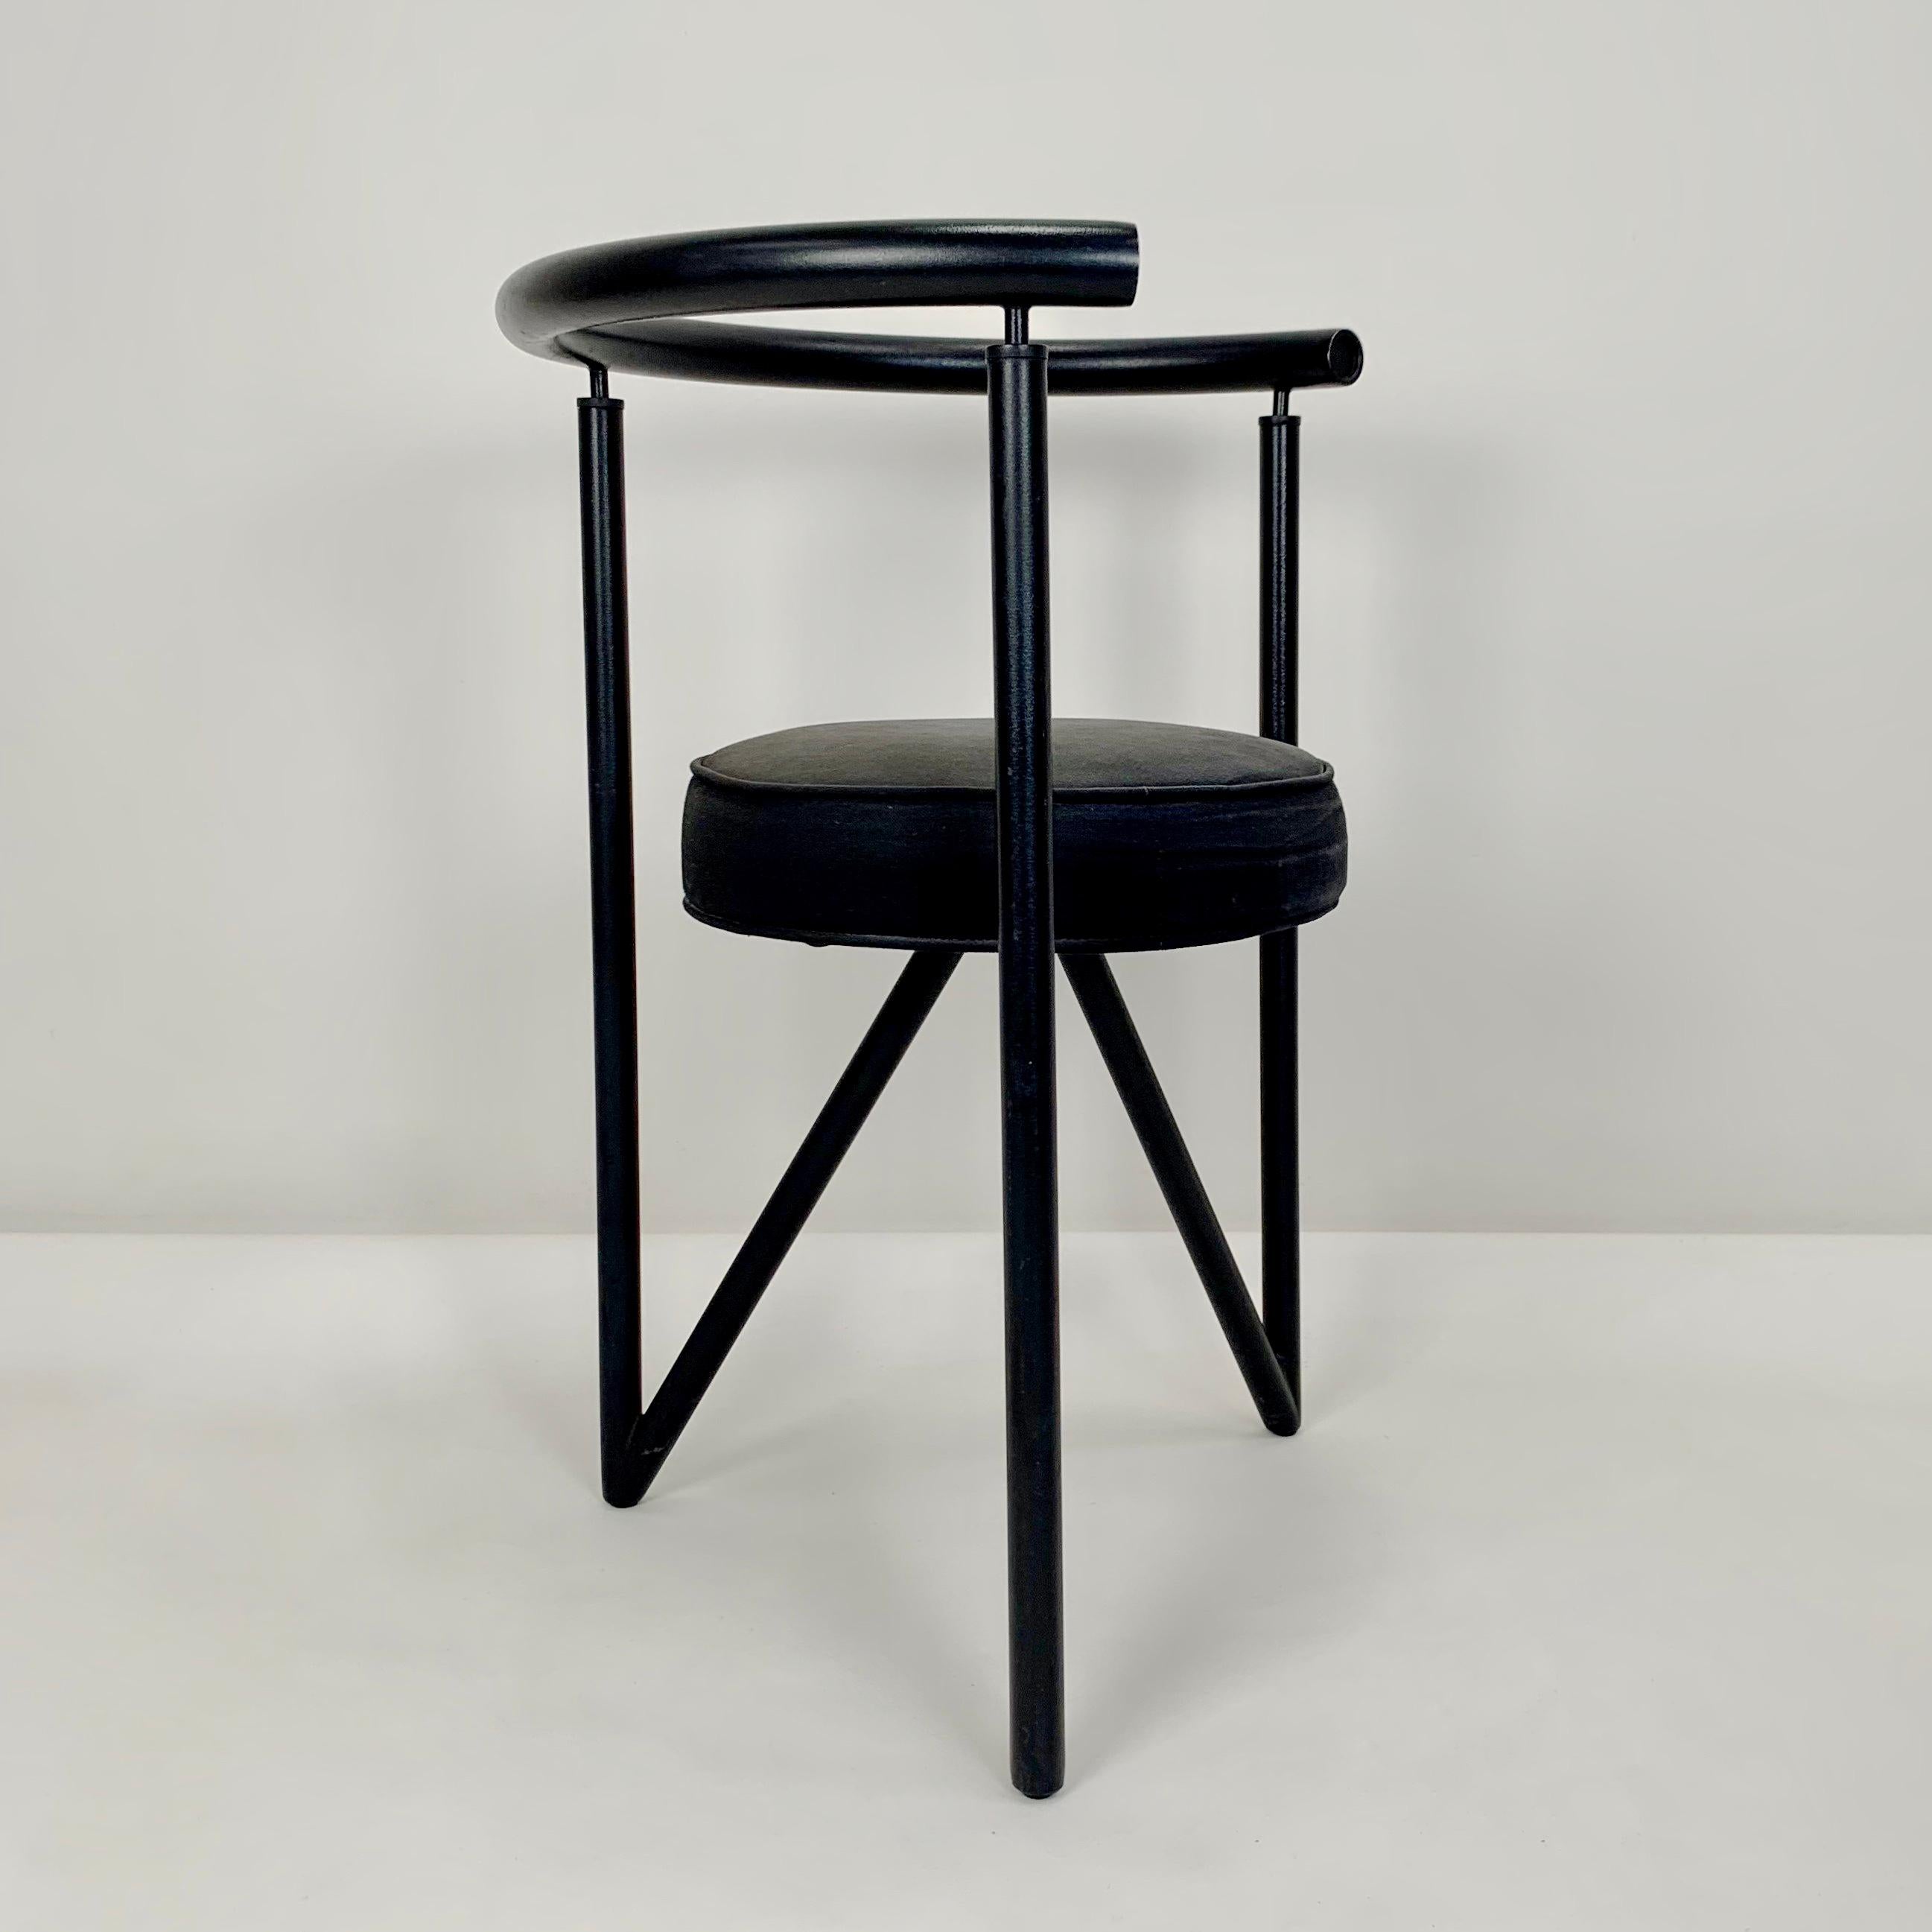 Philippe Starck Miss Dorn model armchair for Disform 1982.
Black metal structure, original black fabric round seat.
Dimensions: 70 cm H, 54 cm W, 44 cm D, seat height: 46 cm.
Original vintage condition.
All purchases are covered by our Buyer